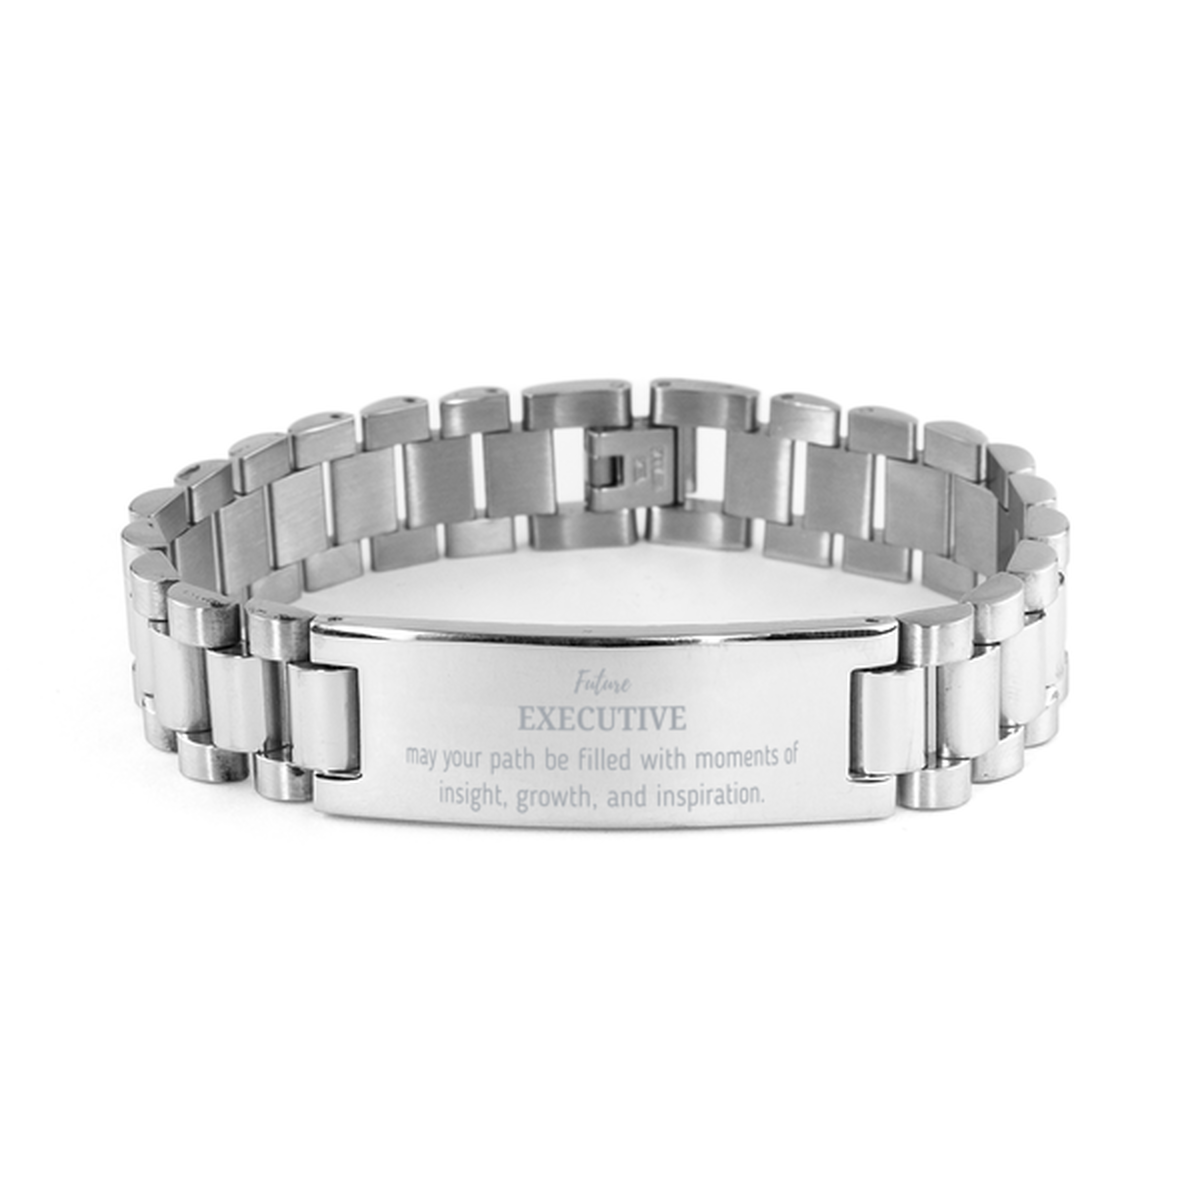 Future Executive Gifts, May your path be filled with moments of insight, Graduation Gifts for New Executive, Christmas Unique Ladder Stainless Steel Bracelet For Men, Women, Friends